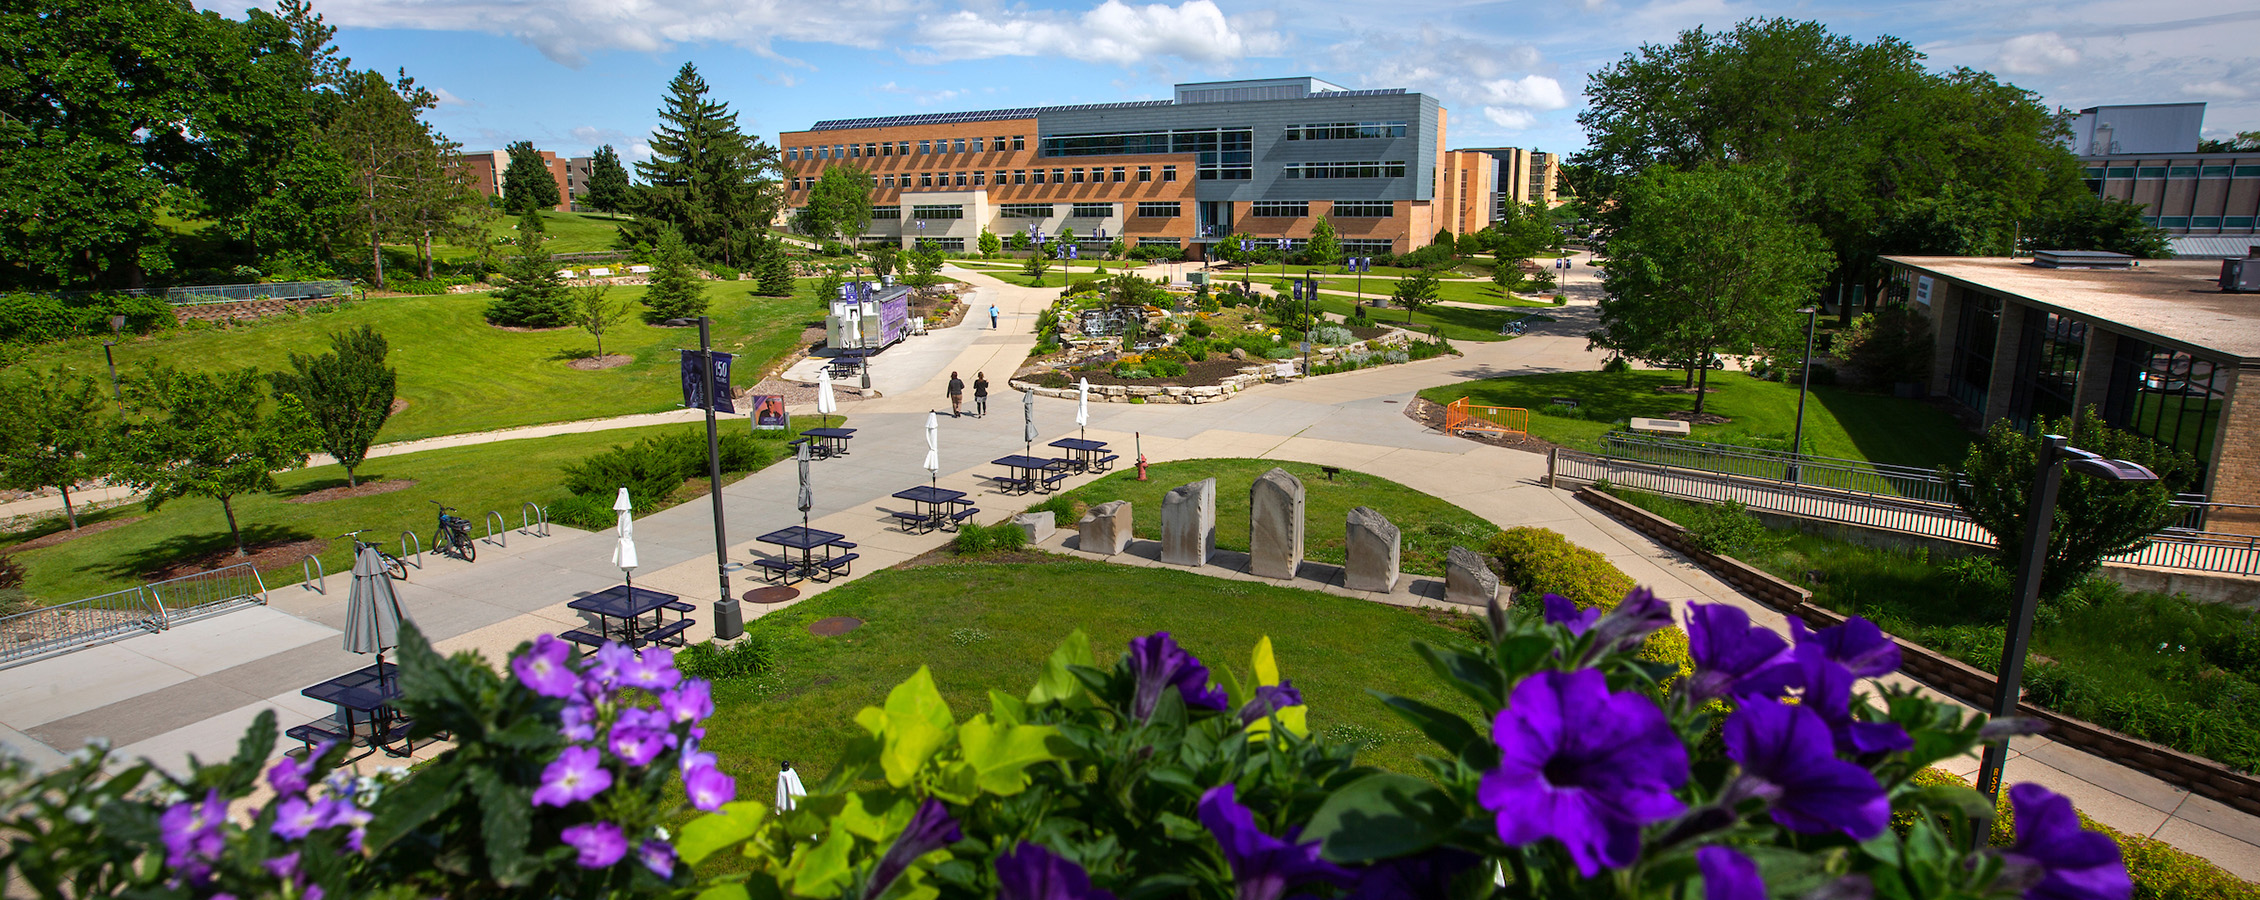 Overhead view of UW-Whitewater campus with purple flowers in the foreground